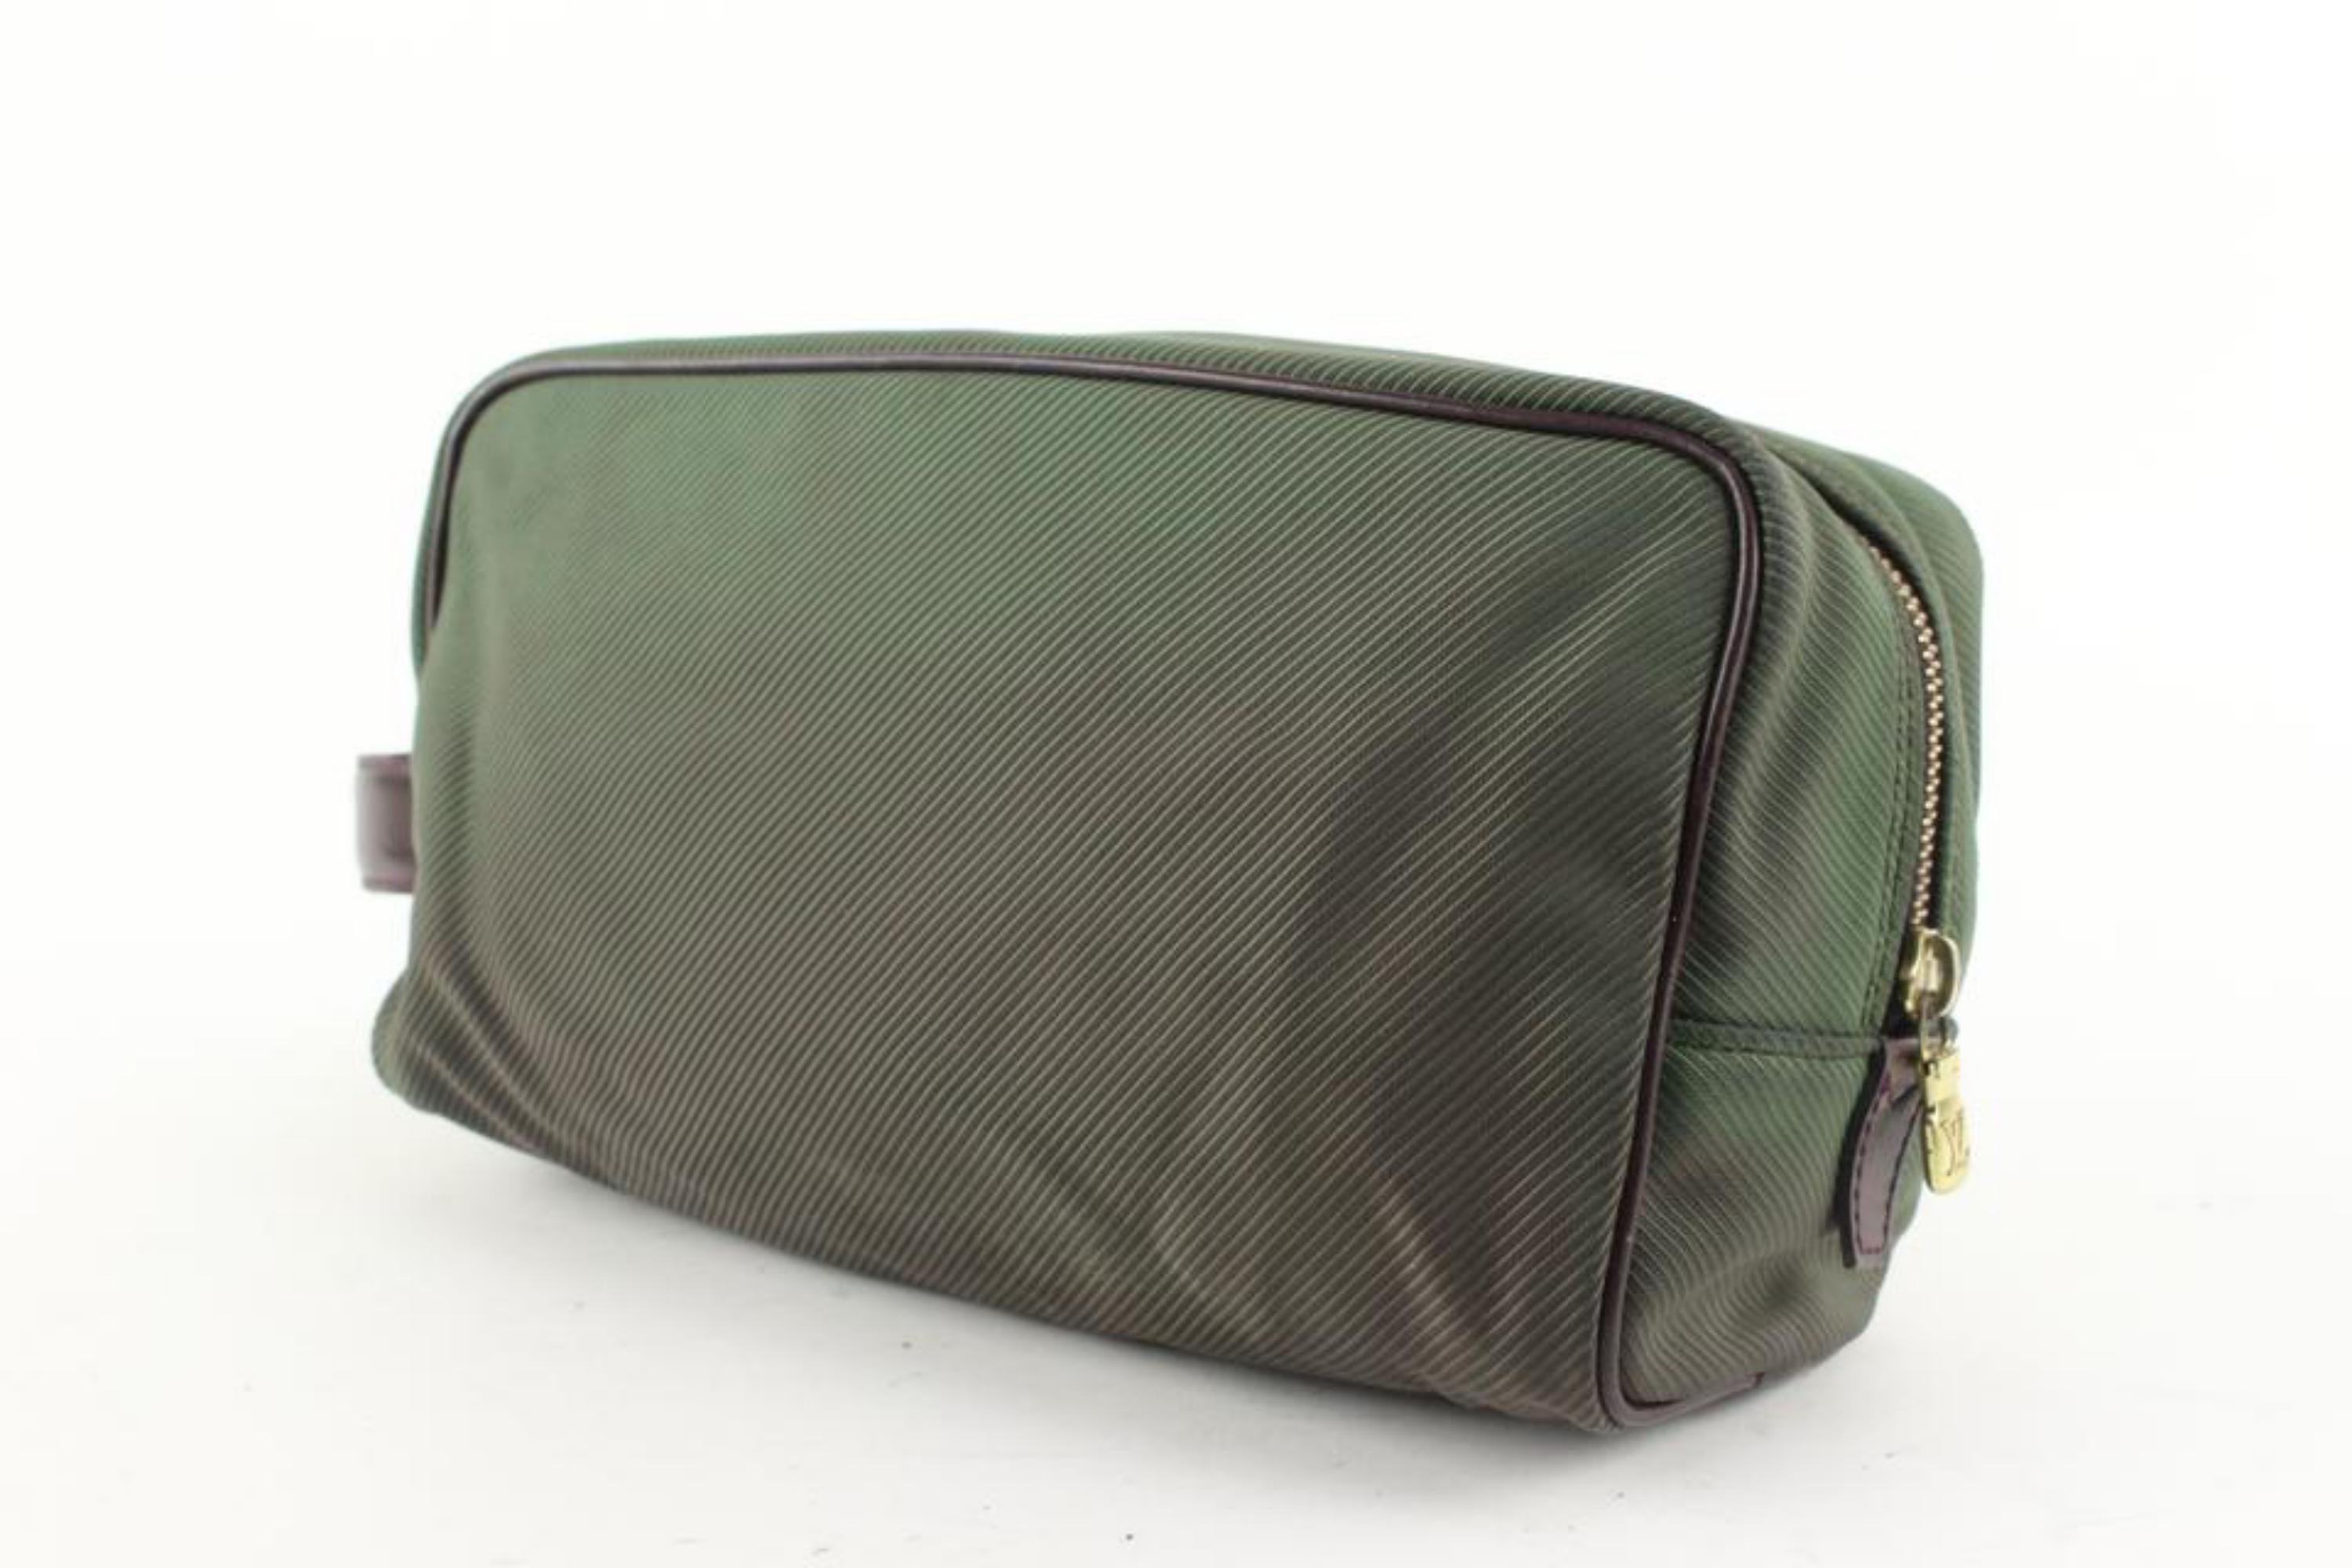 Louis Vuitton Green Palana Trousse Cosmetic Pouch Make Up Toiletry Case 1224lv29
Date Code/Serial Number: CA0091
Made In: Spain
Measurements: Length:  9.5